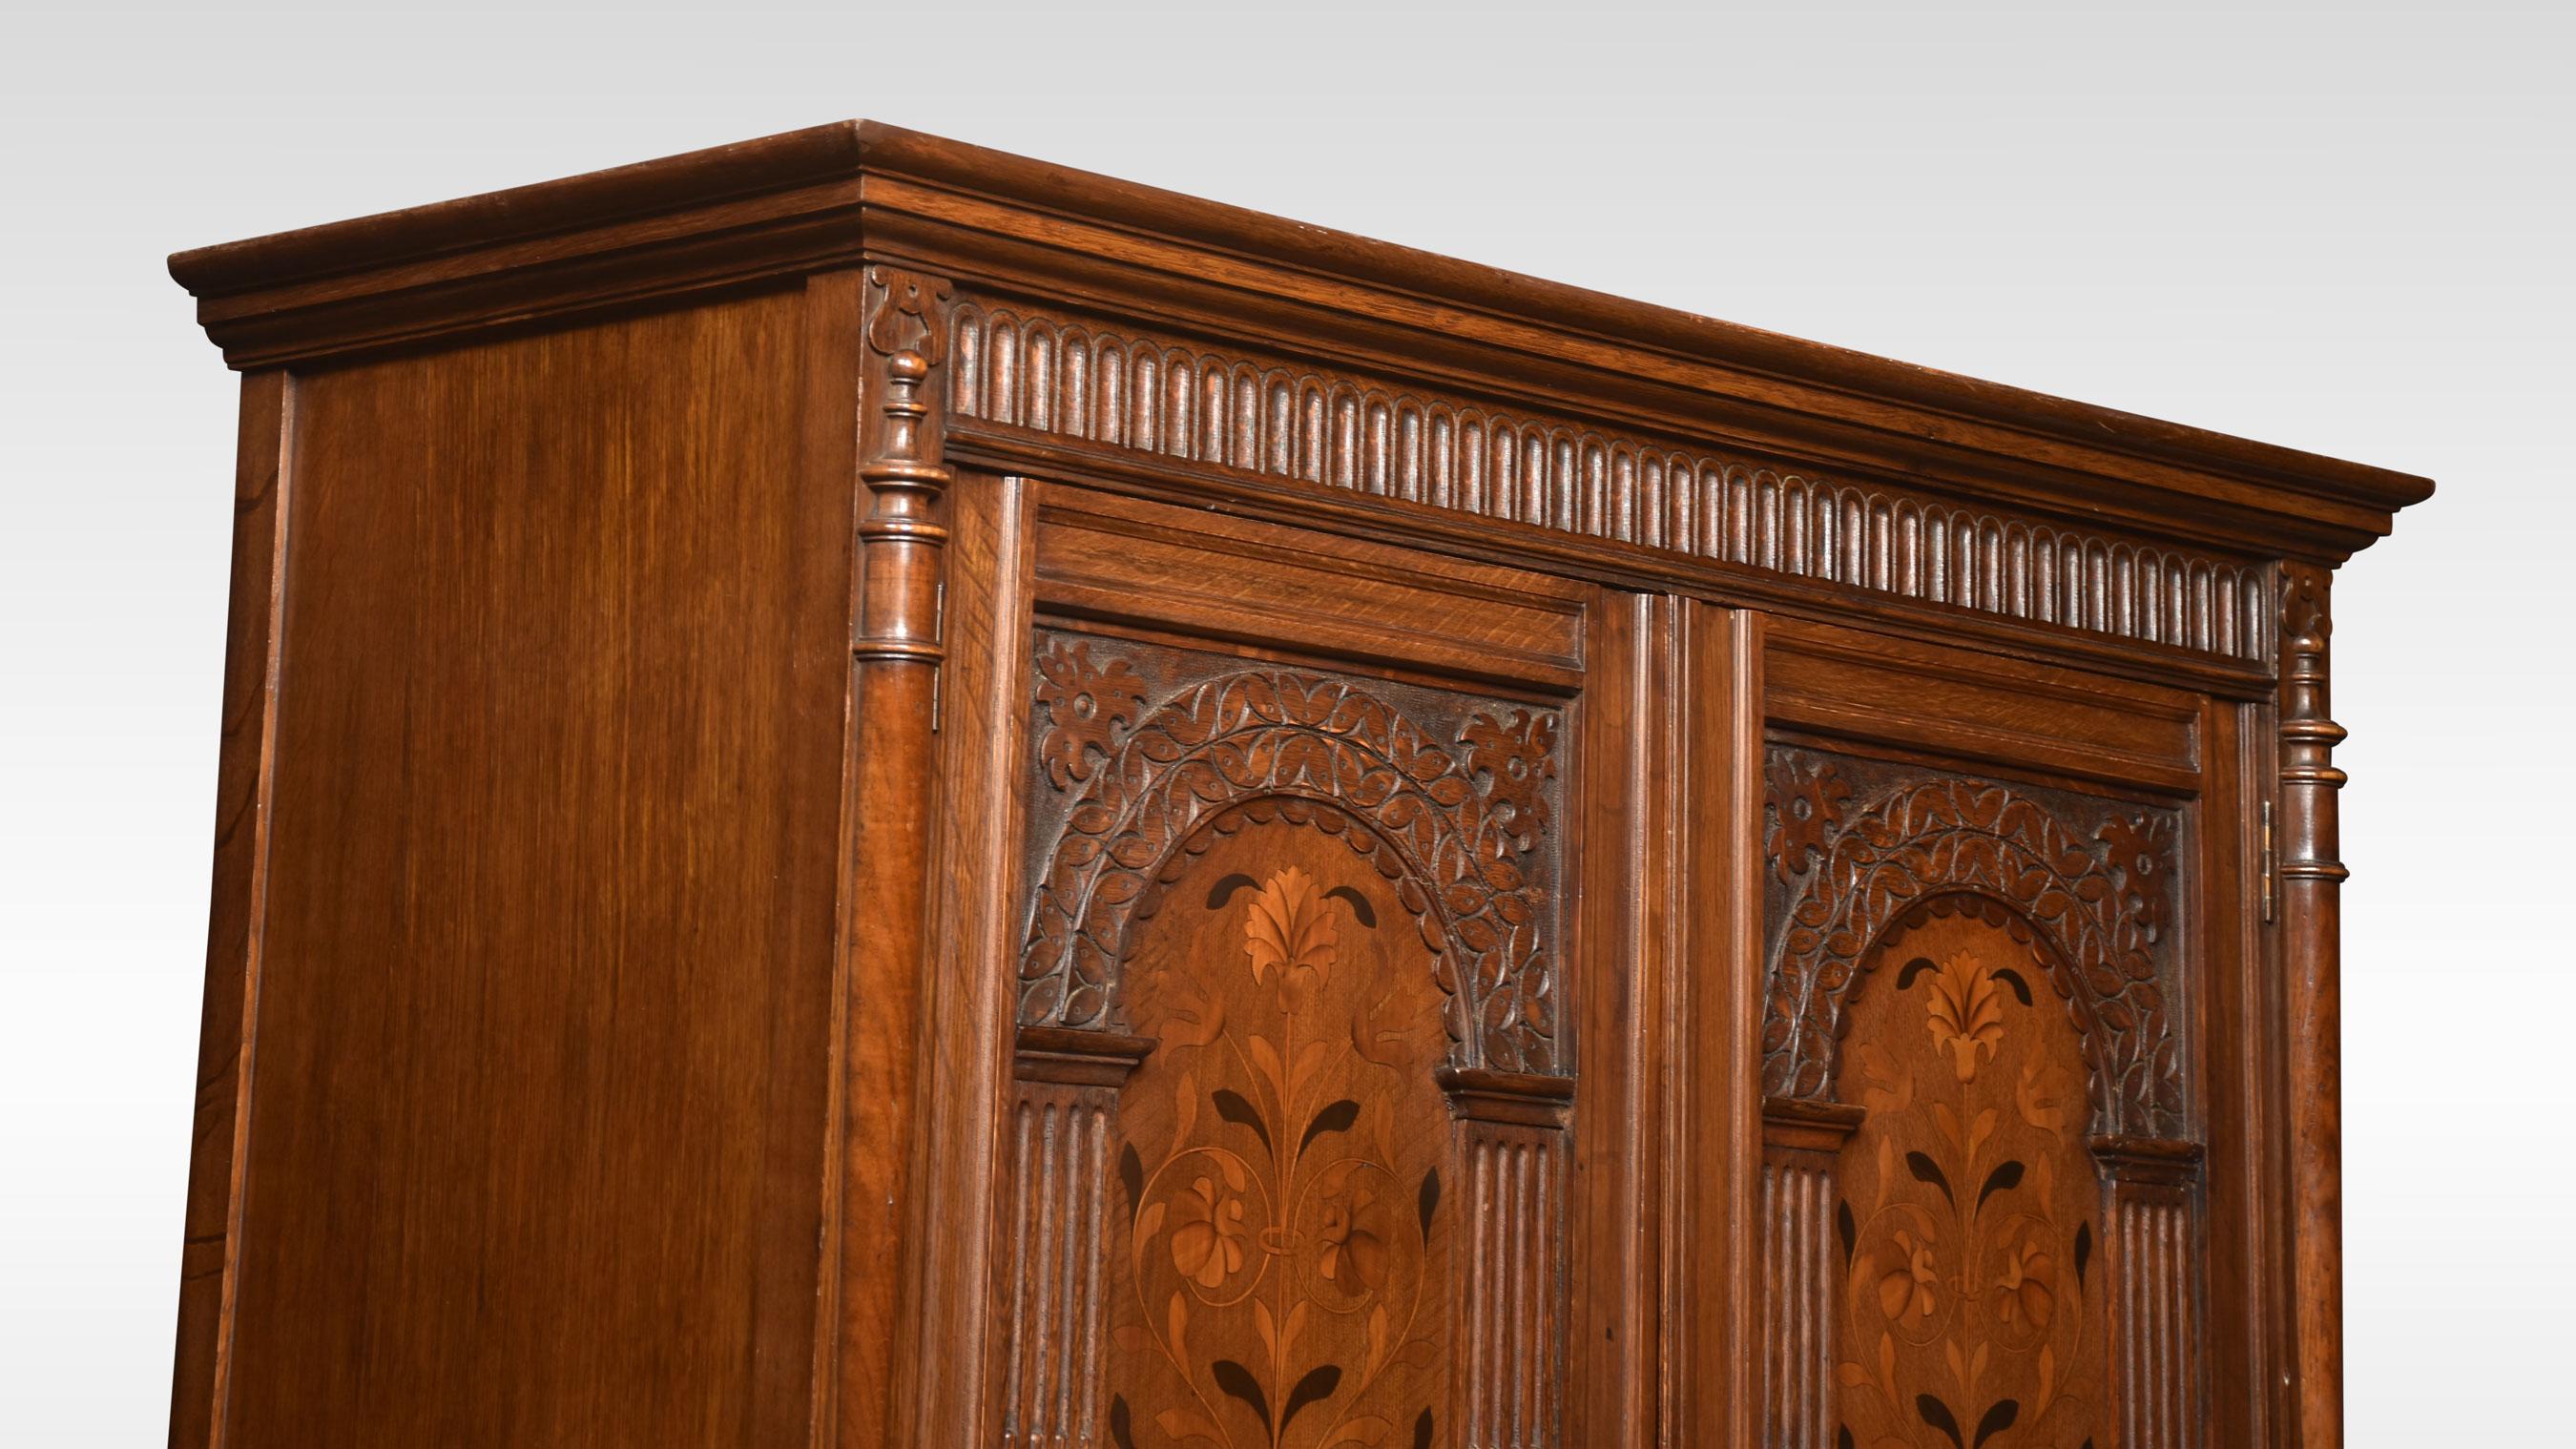 Carved oak hall robe, the moulded cornice above two carved paneled doors with scrolling foliated detail. The large doors opening to reveal a hanging area. All raised on square feet.
Dimensions
Height 72 Inches
Width 45.5 Inches
Depth 19.5 Inches.